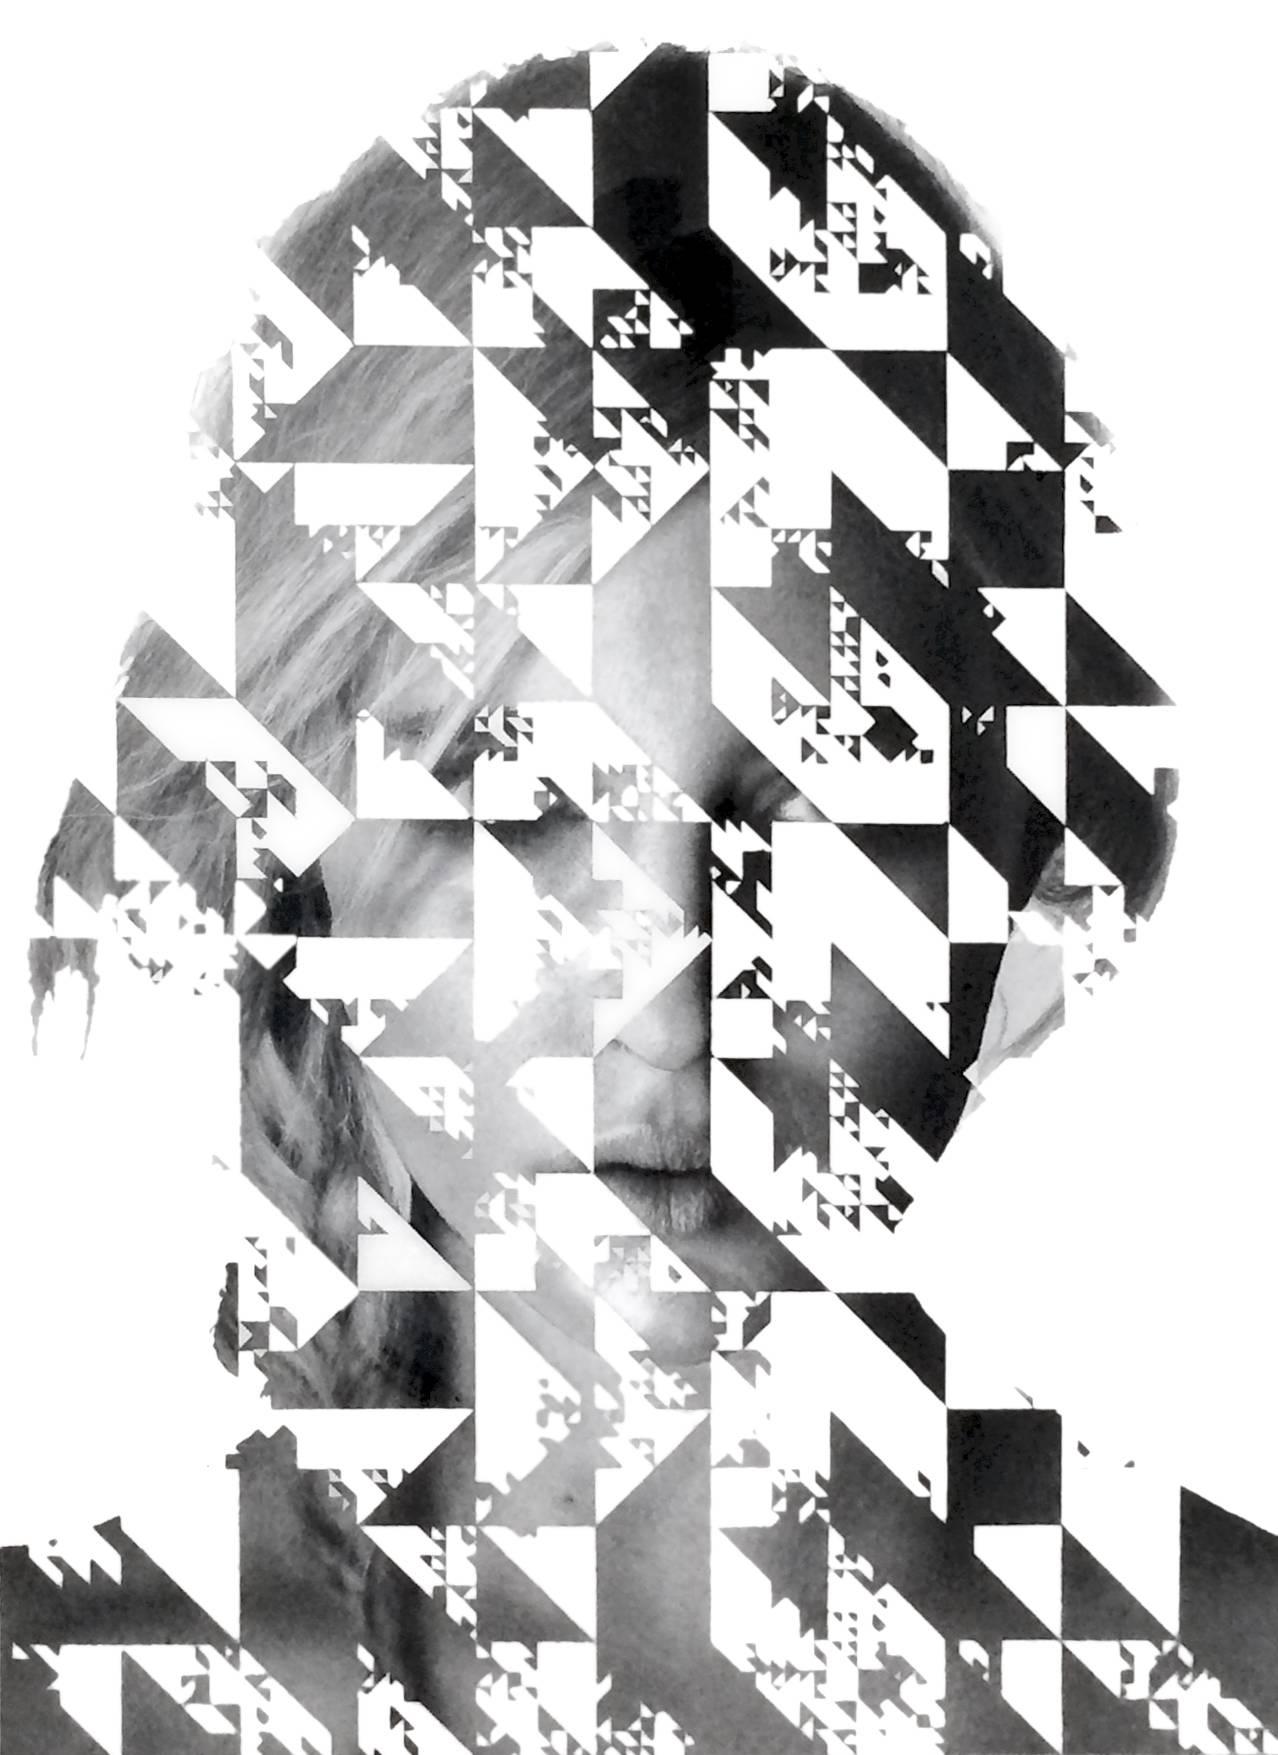 UNTITLED (FAB V) - portrait / overlaid designs /black and white / greyscale